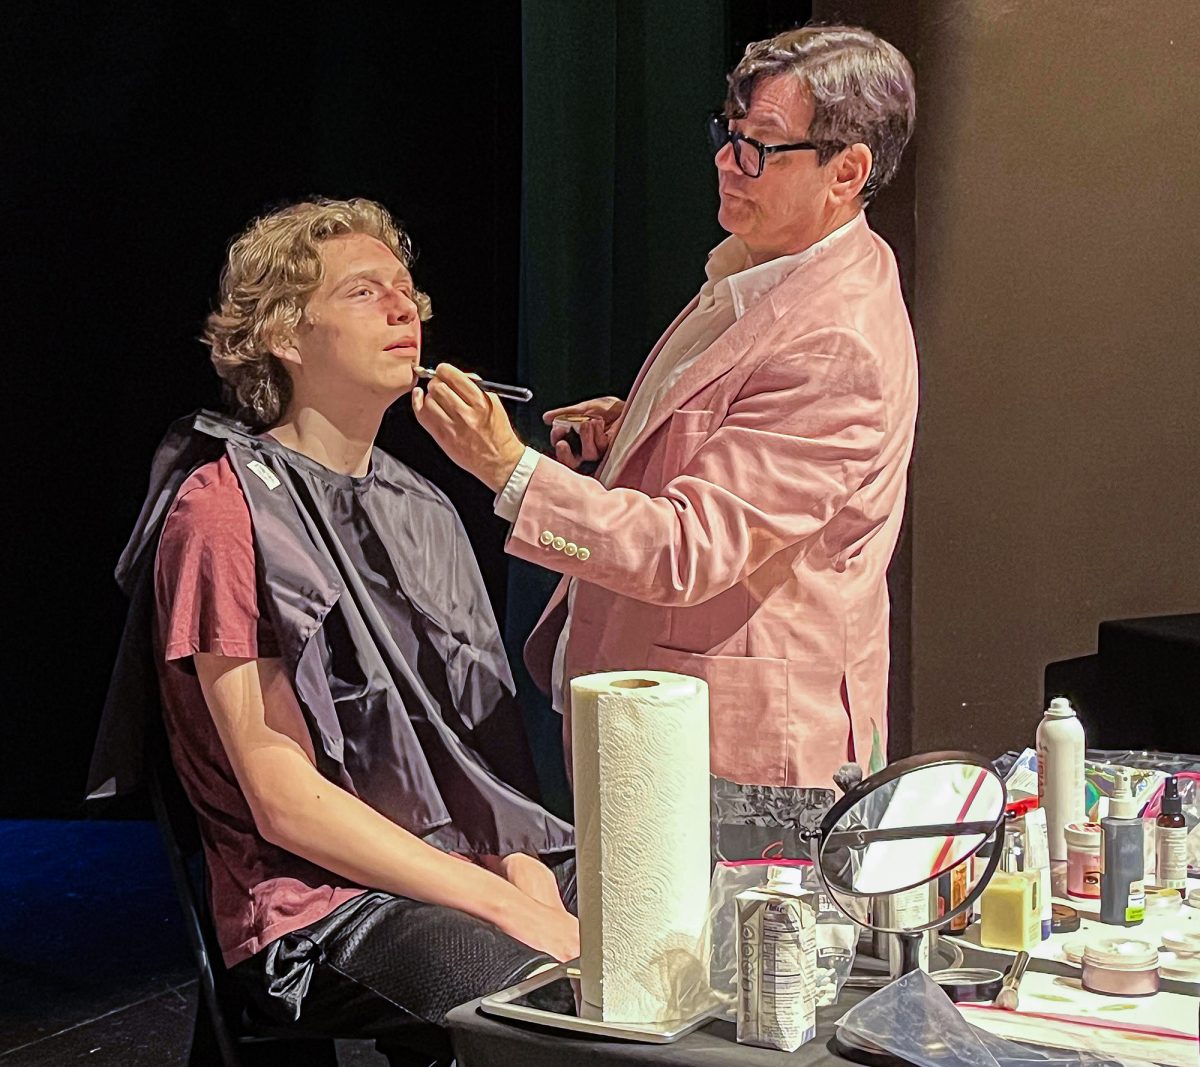 Donald Mowat, right, shares his makeup artistry with an unknown student during a visit to the Brookhaven campus recently.